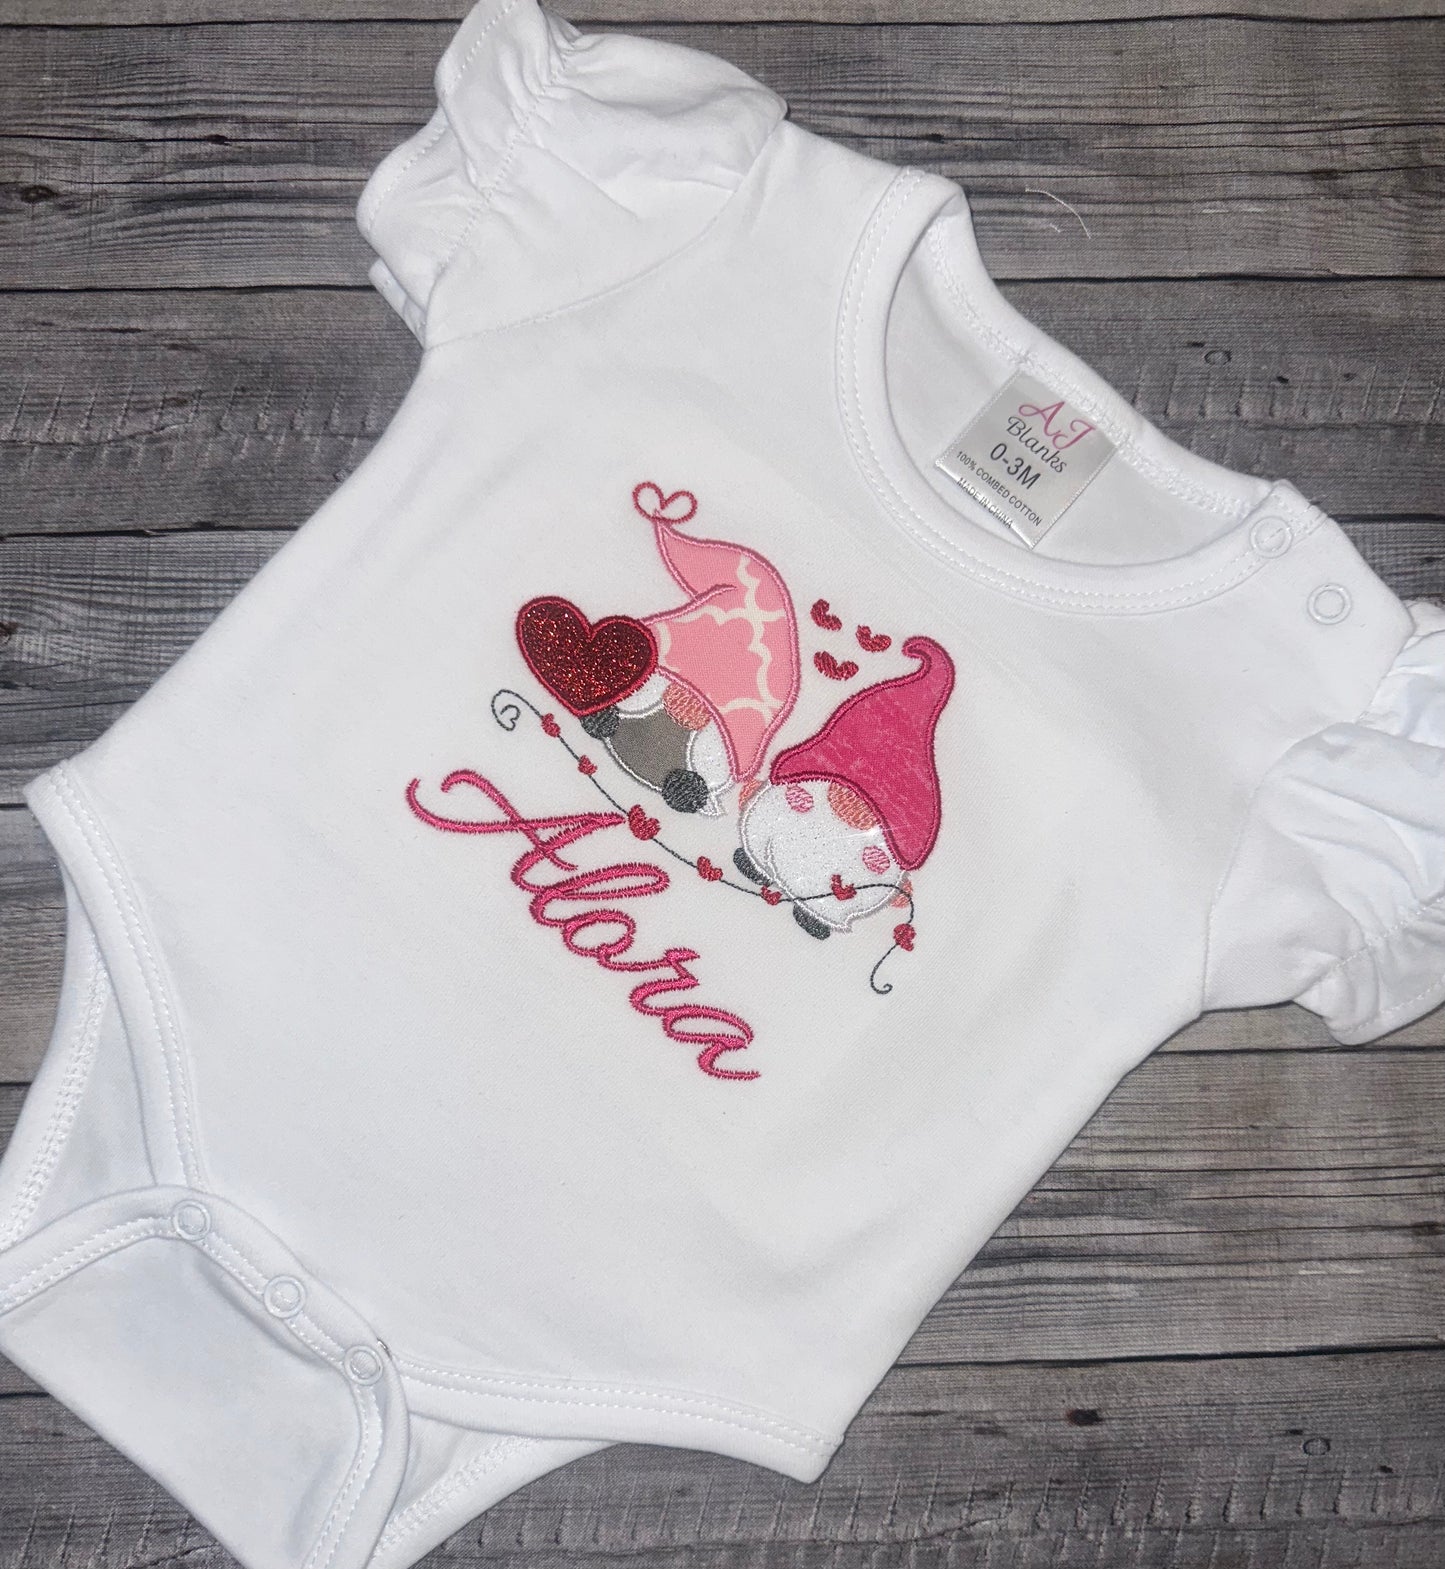 Two Gnomes Valentine's Day shirt for girls